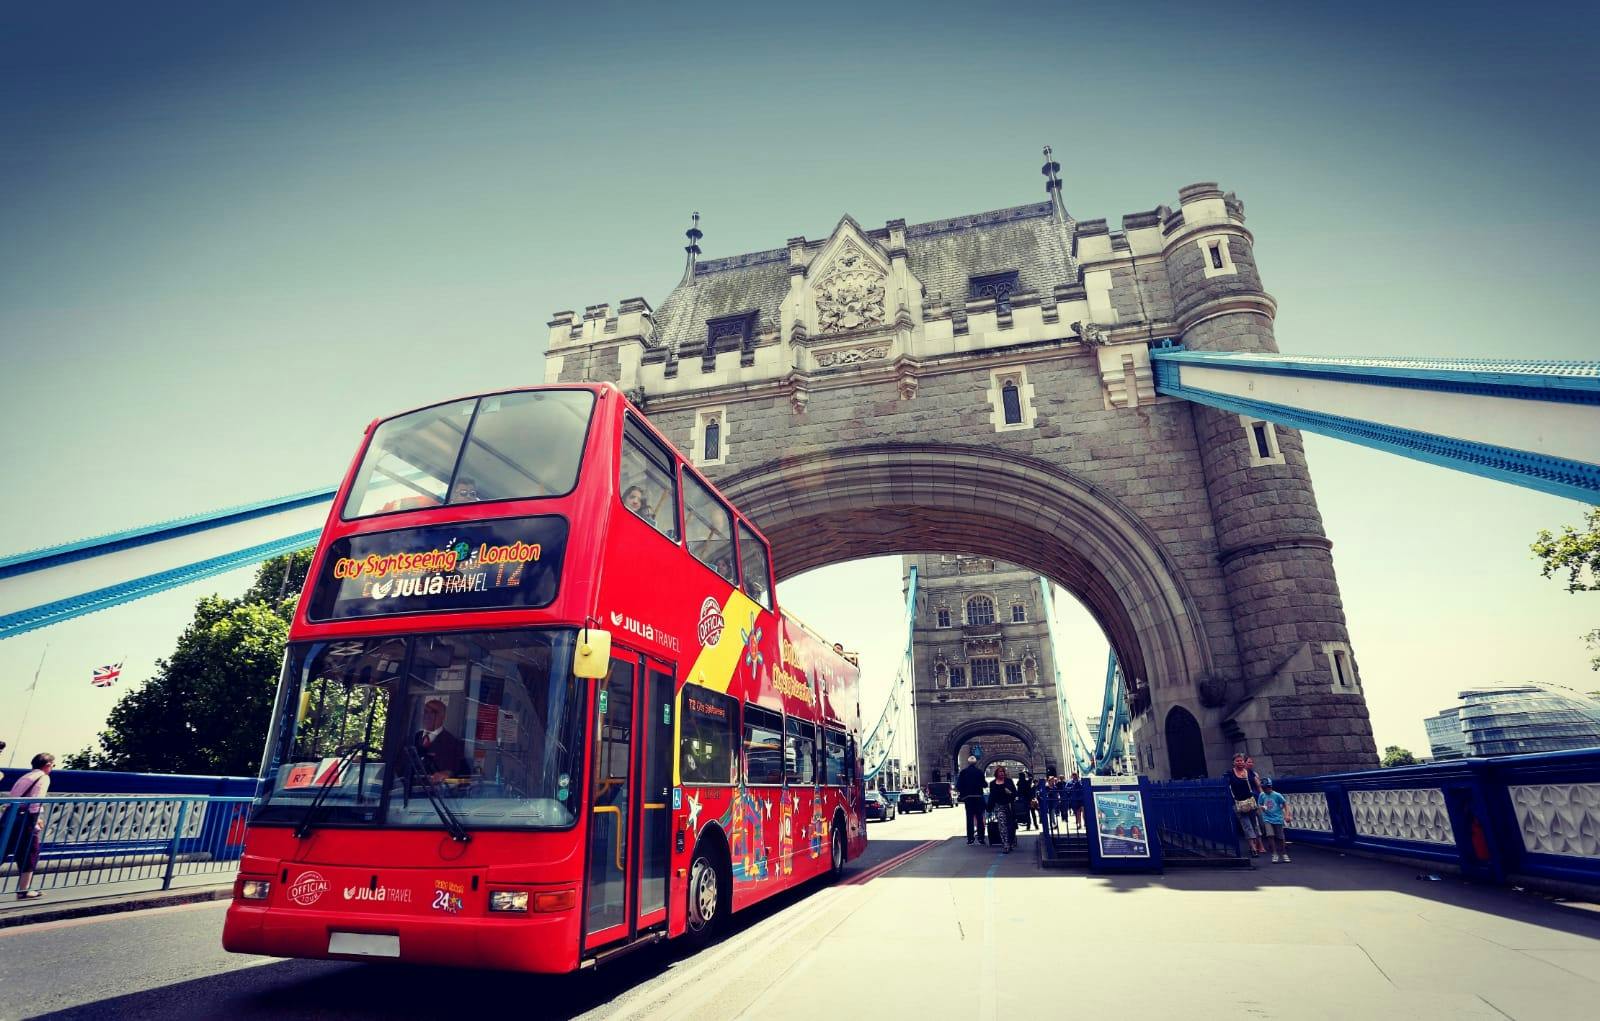 City Sightseeing hop-on hop-off bus tour of London